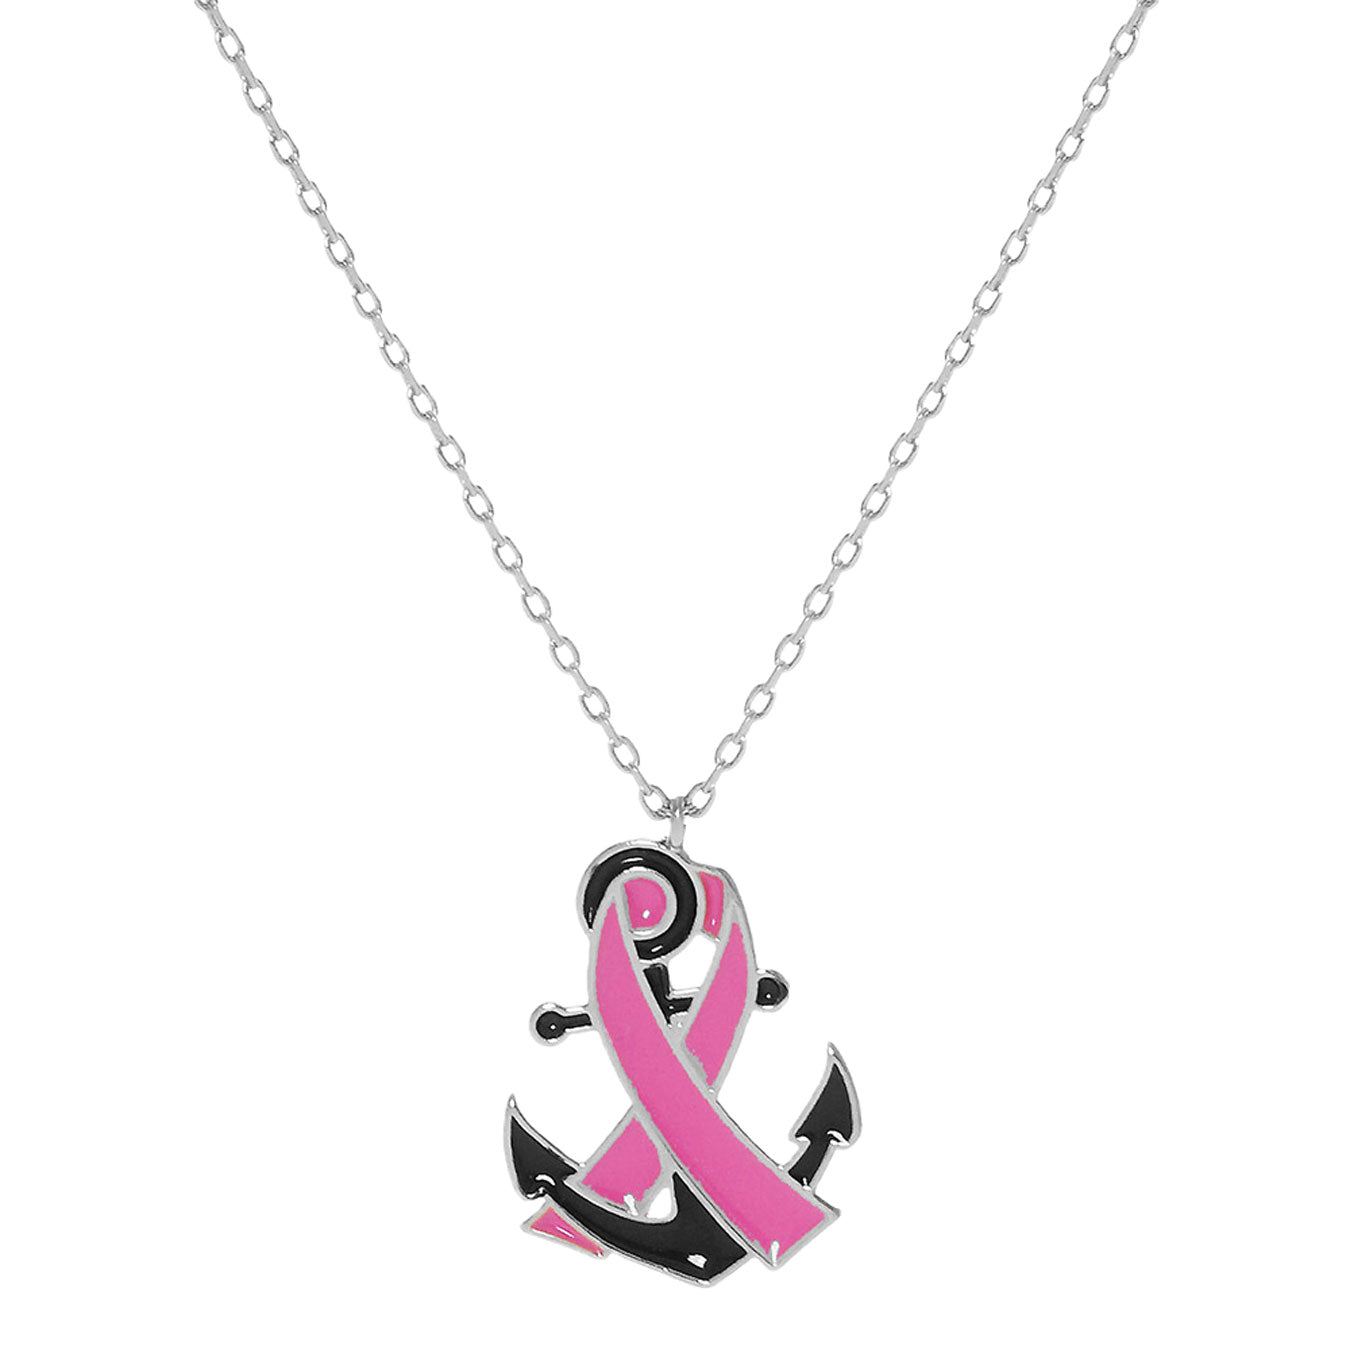 Gold Dipped Enamel Anchor Pink Ribbon Pendant Necklace. Beautifully crafted design adds a gorgeous glow to any outfit. Jewelry that fits your lifestyle! Perfect Birthday Gift, Anniversary Gift, Mother's Day Gift, Anniversary Gift, Graduation Gift, Prom Jewelry, Just Because Gift, Thank you Gift.